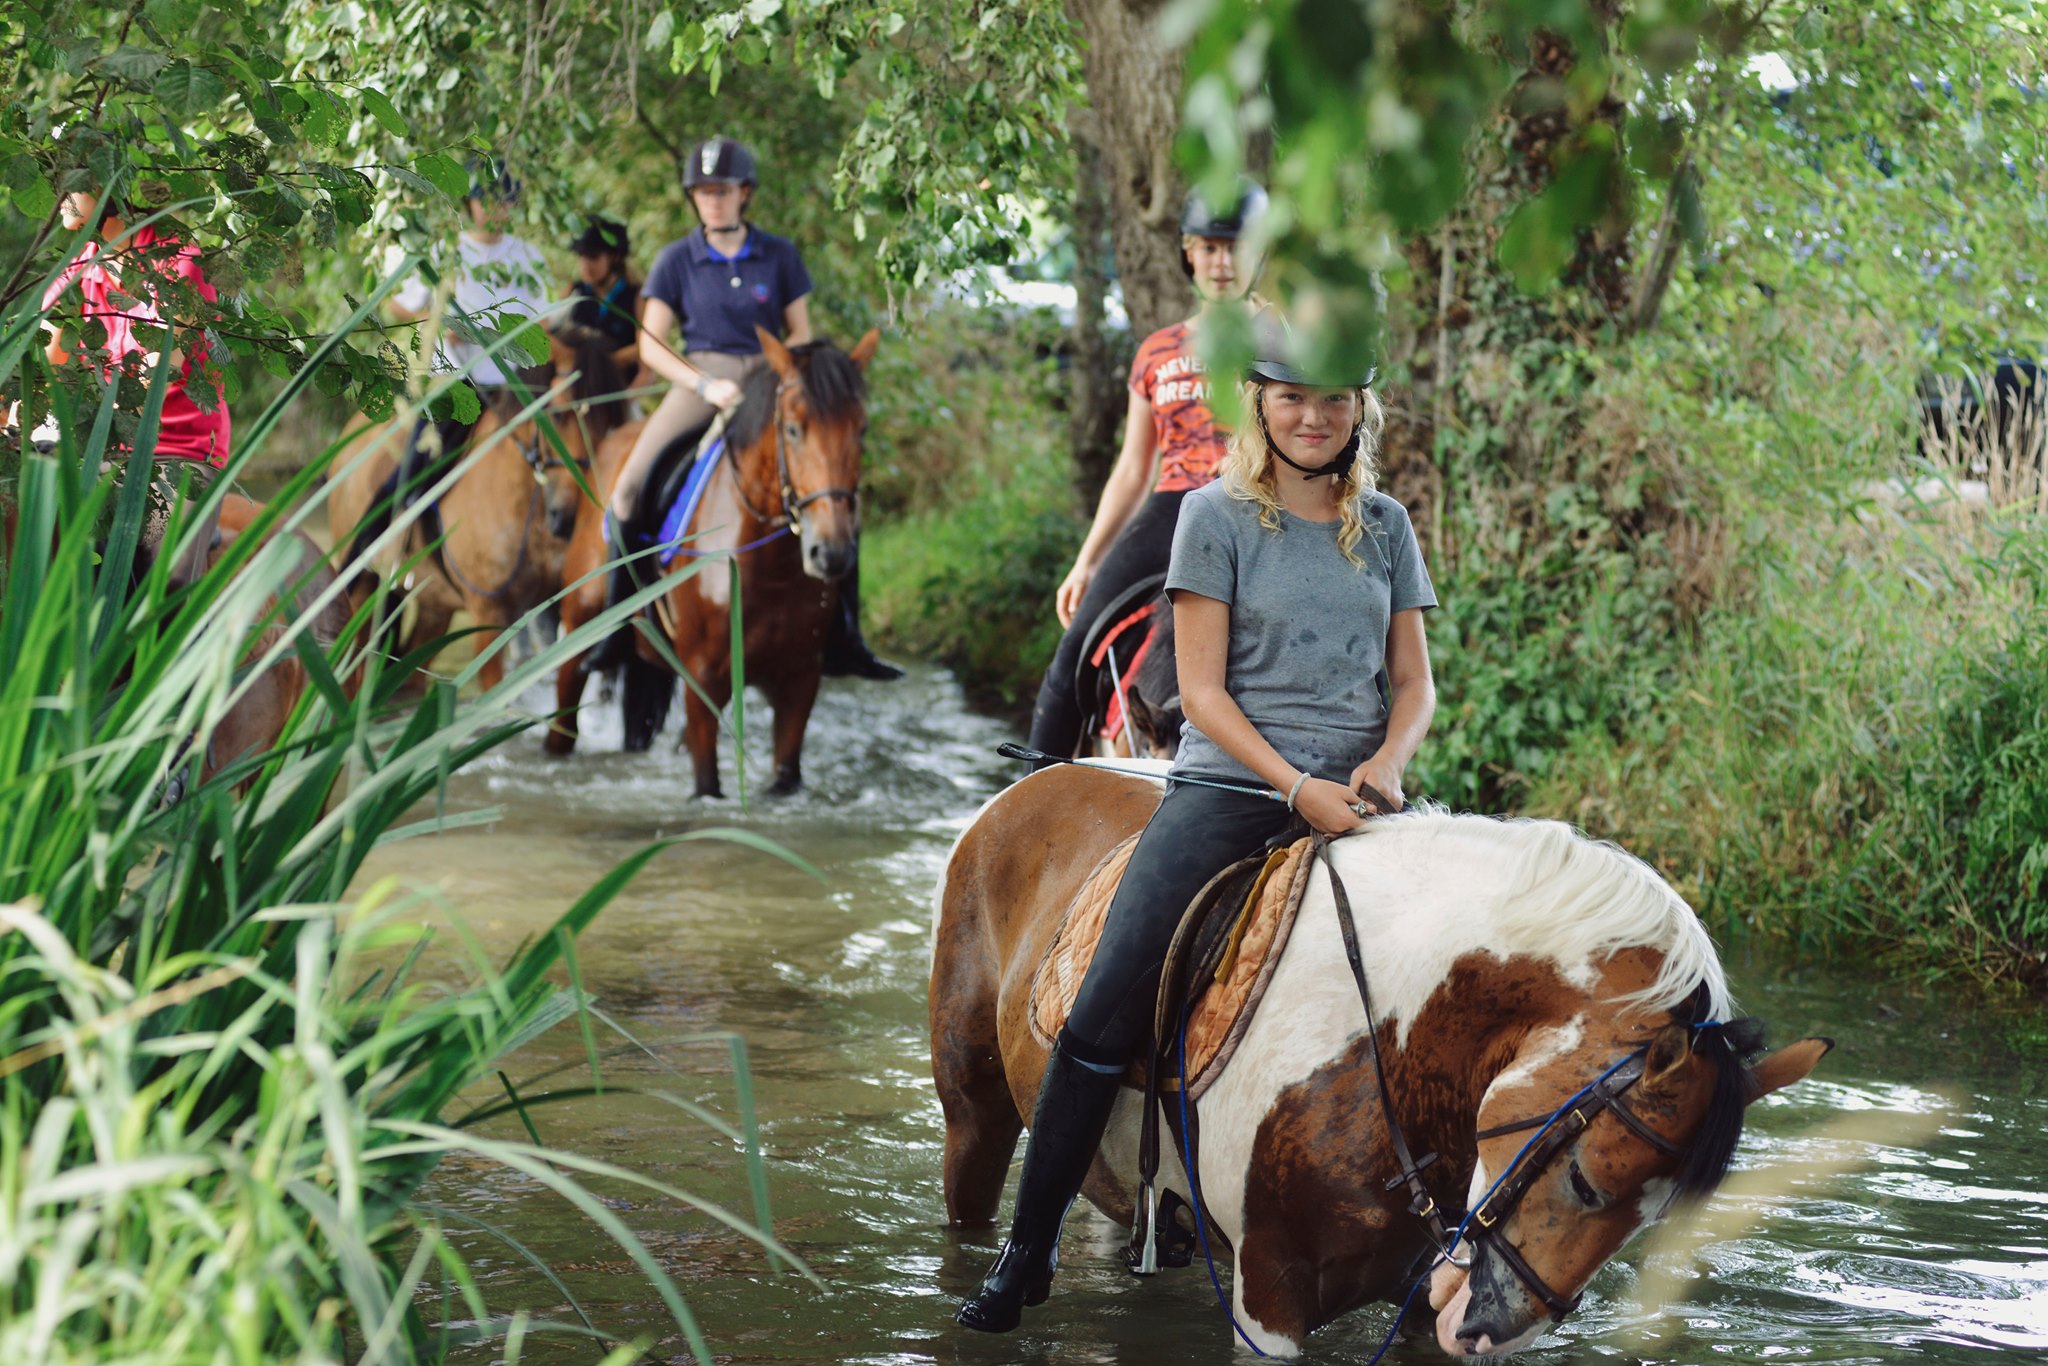 Enjoy horseriding on your family quirky accomodation holiday in France at the Domaine du Lieu Dieu